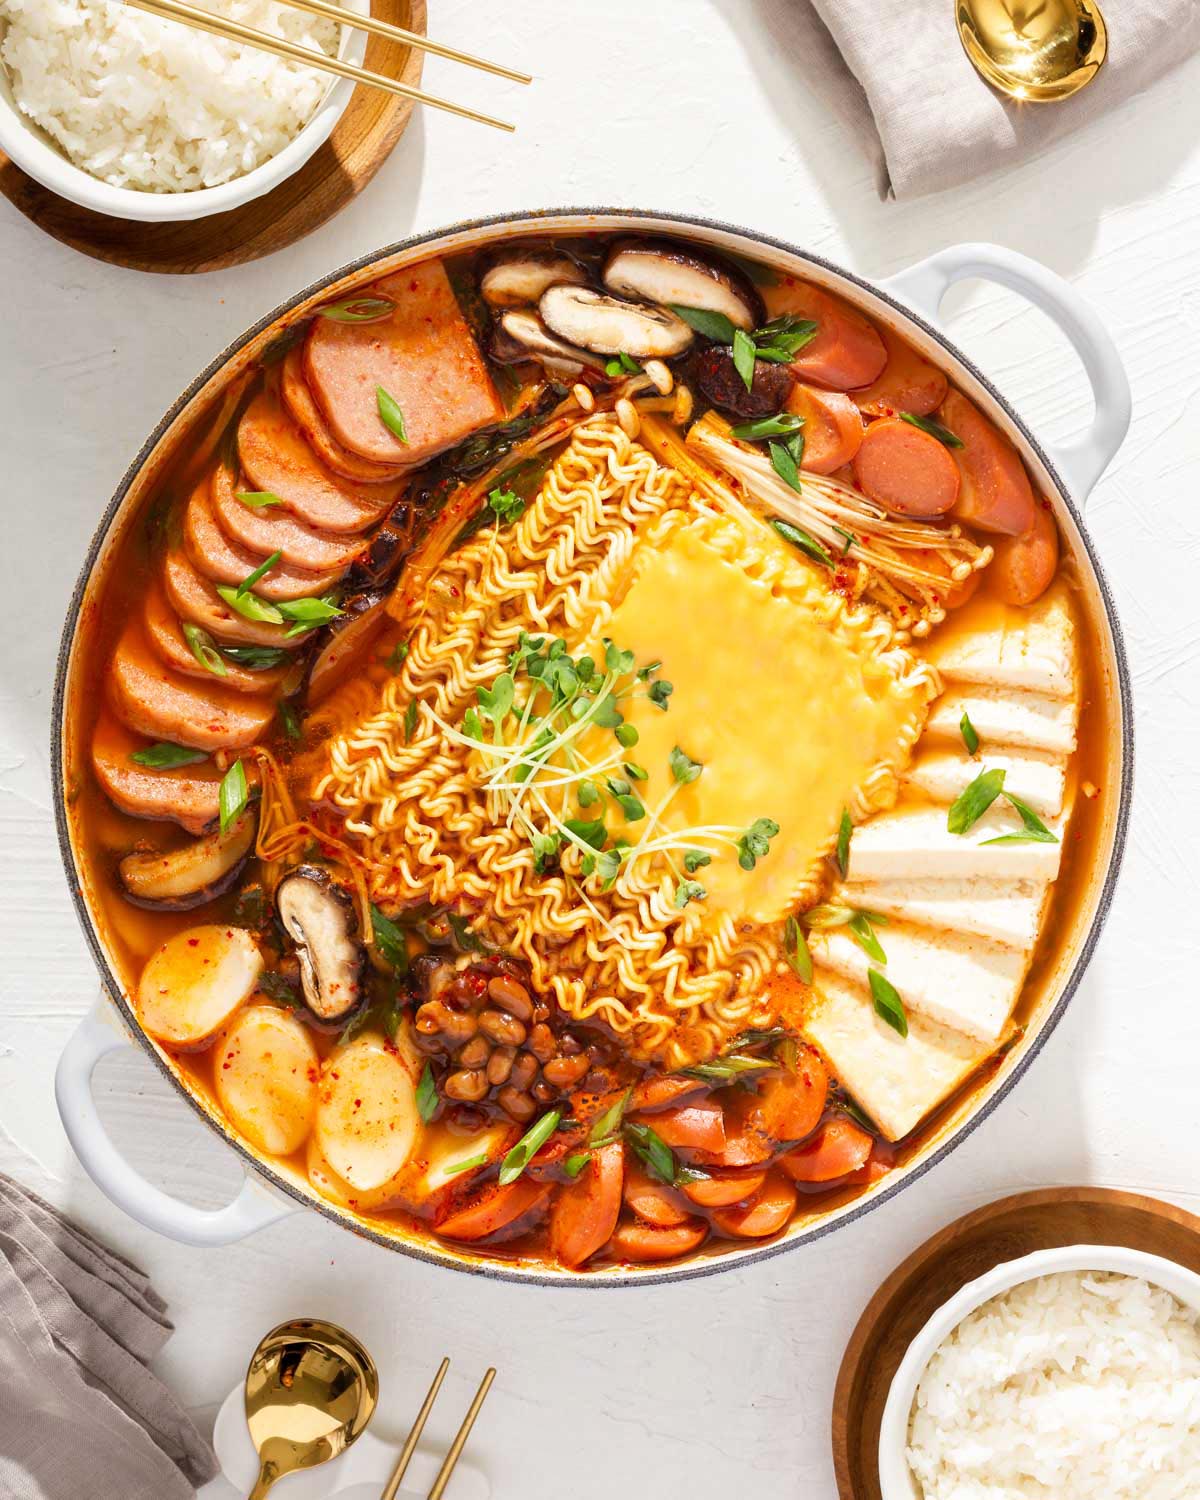 Looking down into a large pot of Korean budae jjigae.